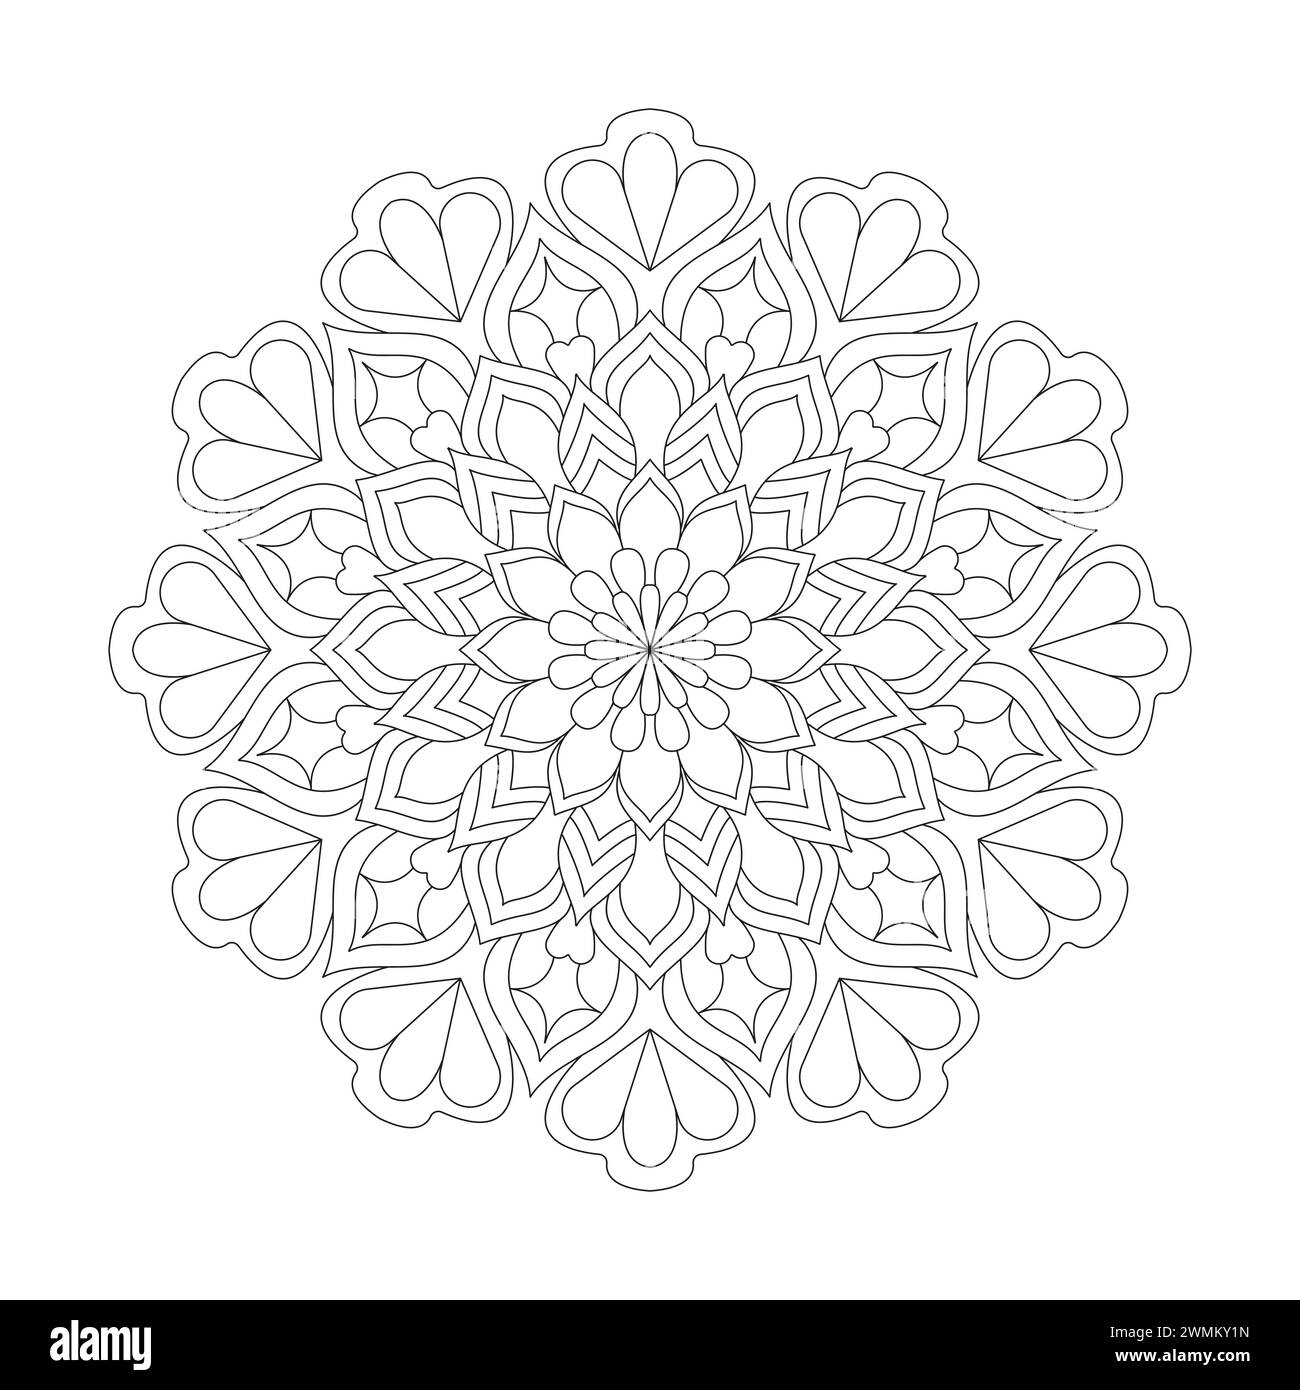 Luminous Attractive Mandala Coloring Book Page for kdp Book Interior. Peaceful Petals, Ability to Relax, Brain Experiences, Harmonious Haven, Peaceful Stock Vector